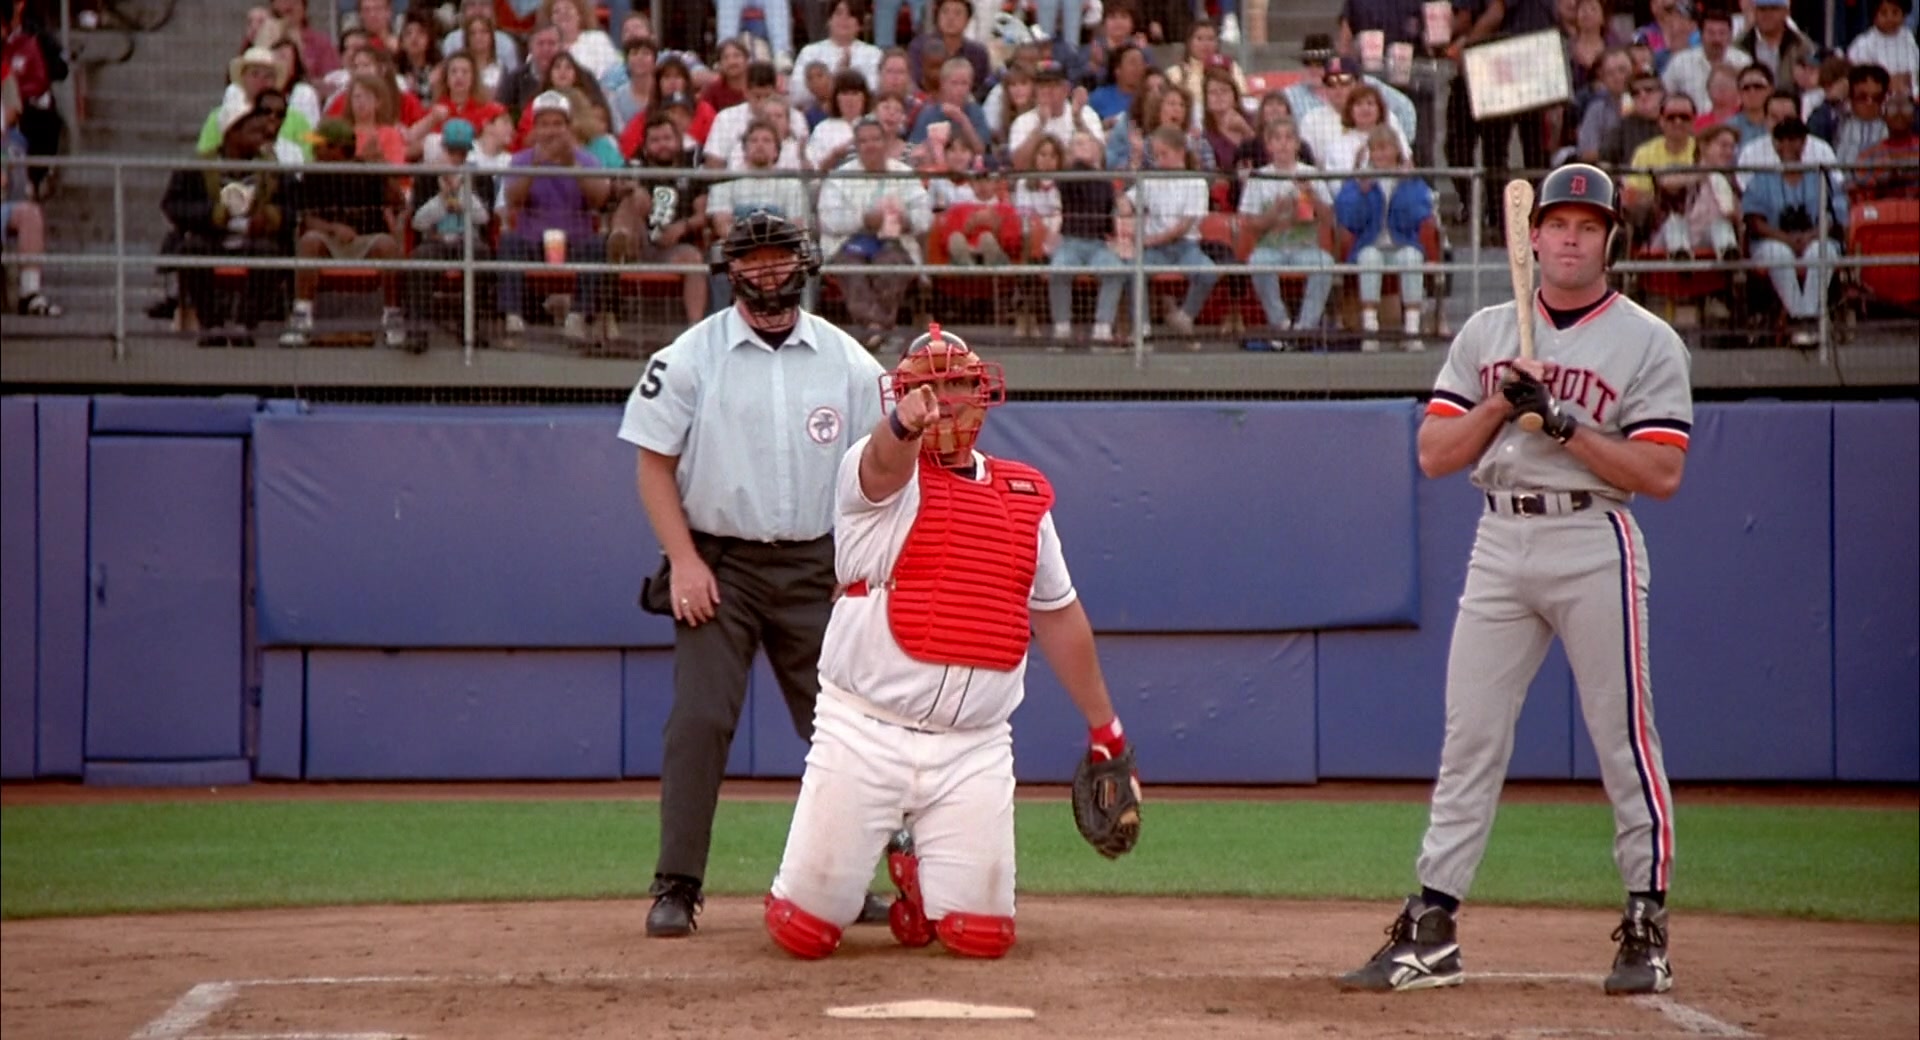 Reebok Baseball Cleats In The Outfield (1994)